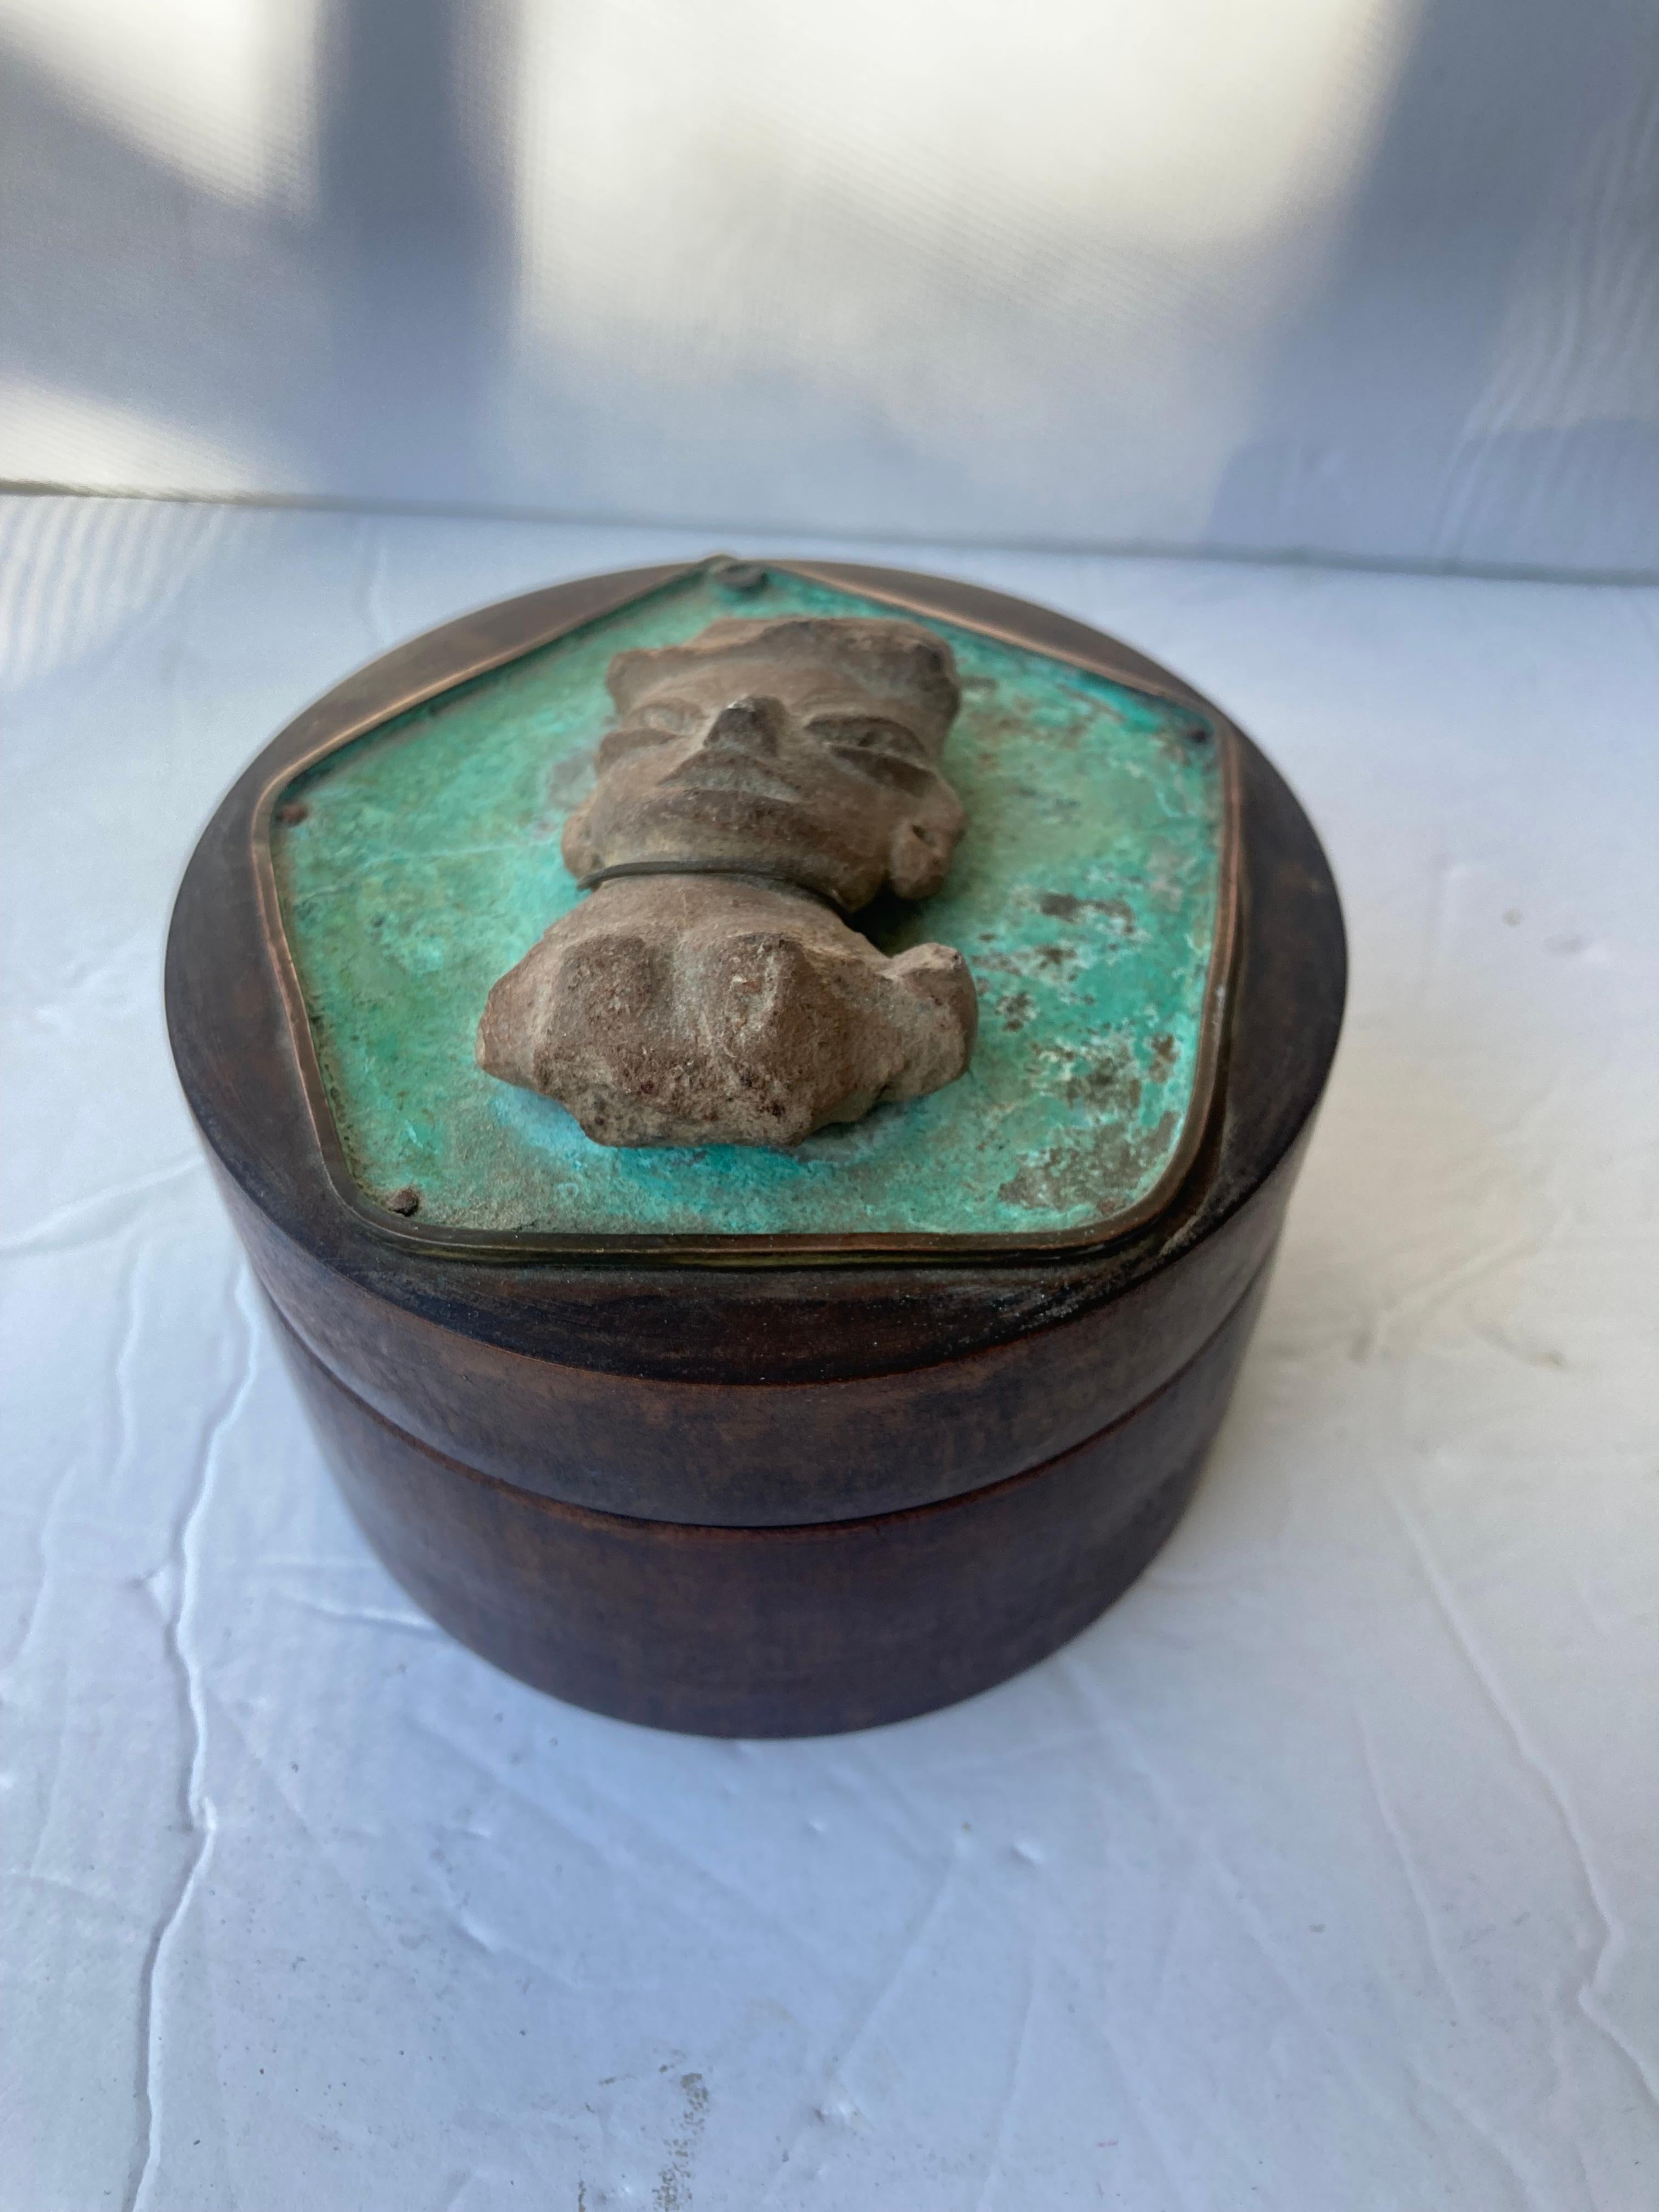 Beautiful jewelry box by the known American artist Ken Belgian. He worked in Taxco, Mexico in a modern/primitive style craft . This wooden box has copper and a figure that appears to be pre-columbian style head, and is signed inside lead in pencil.